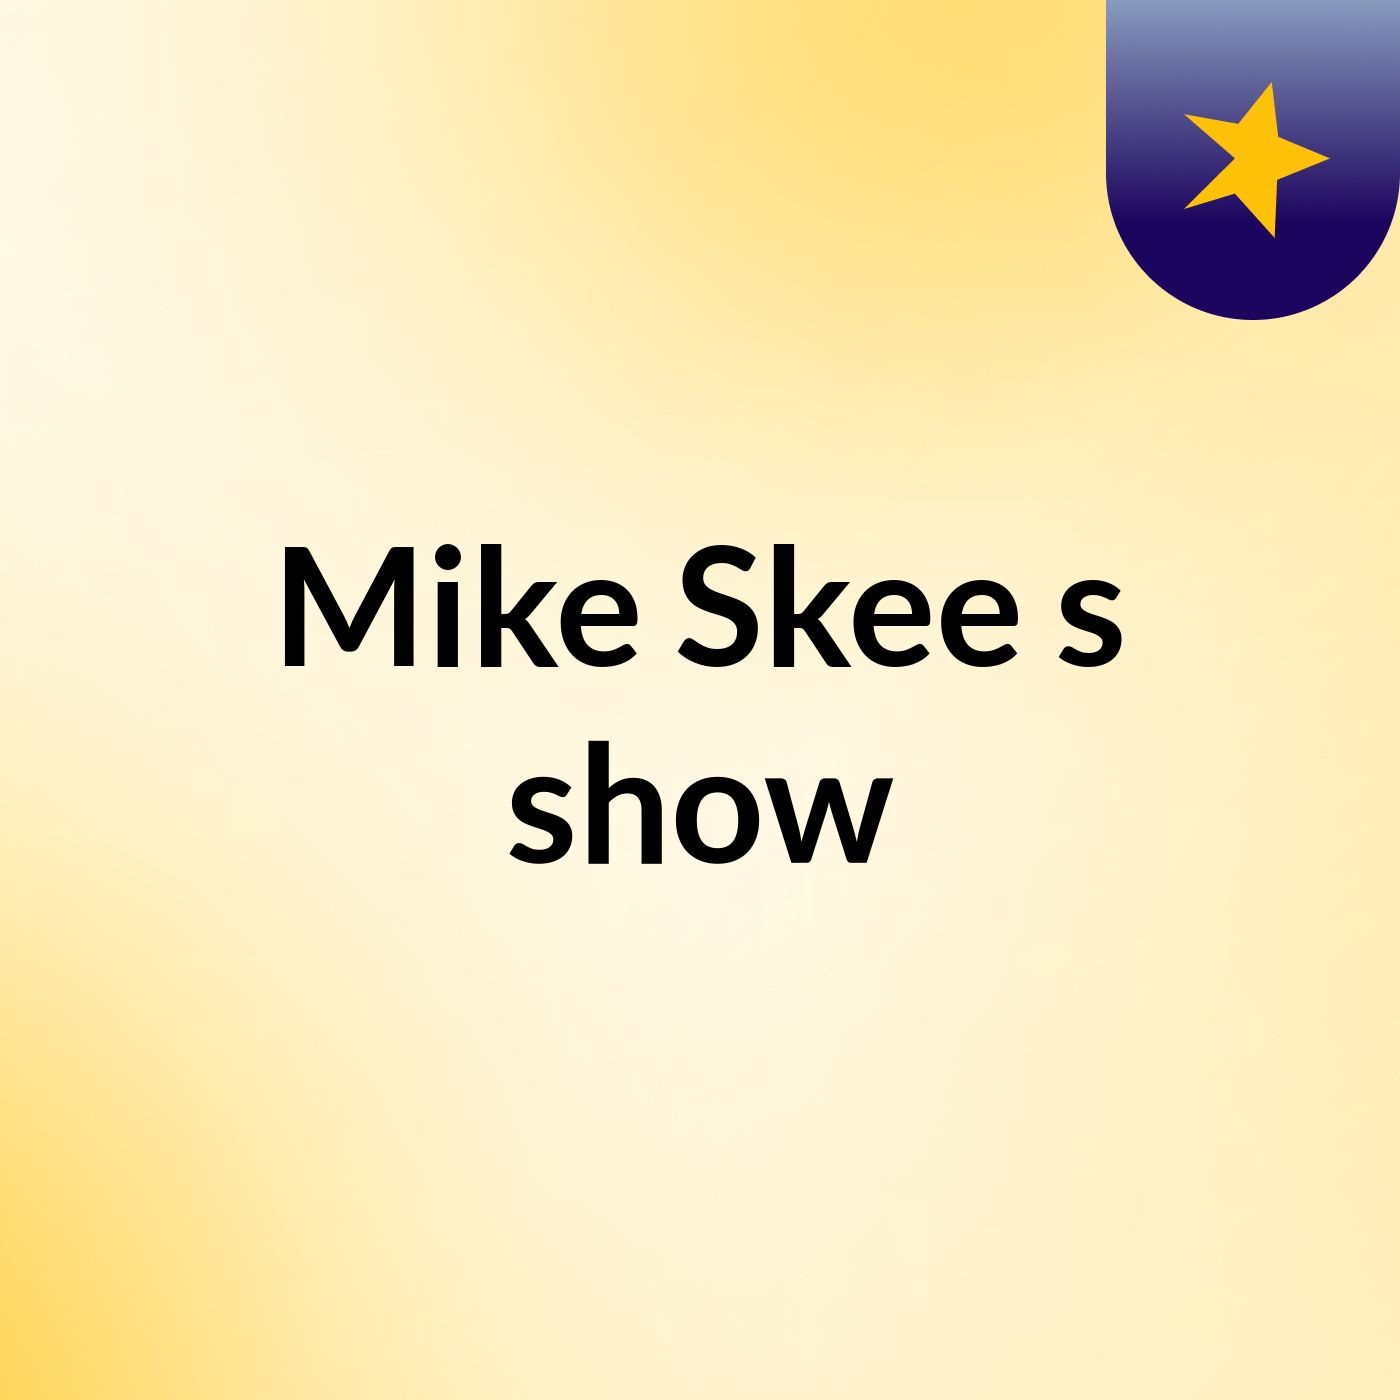 Mike Skee's show